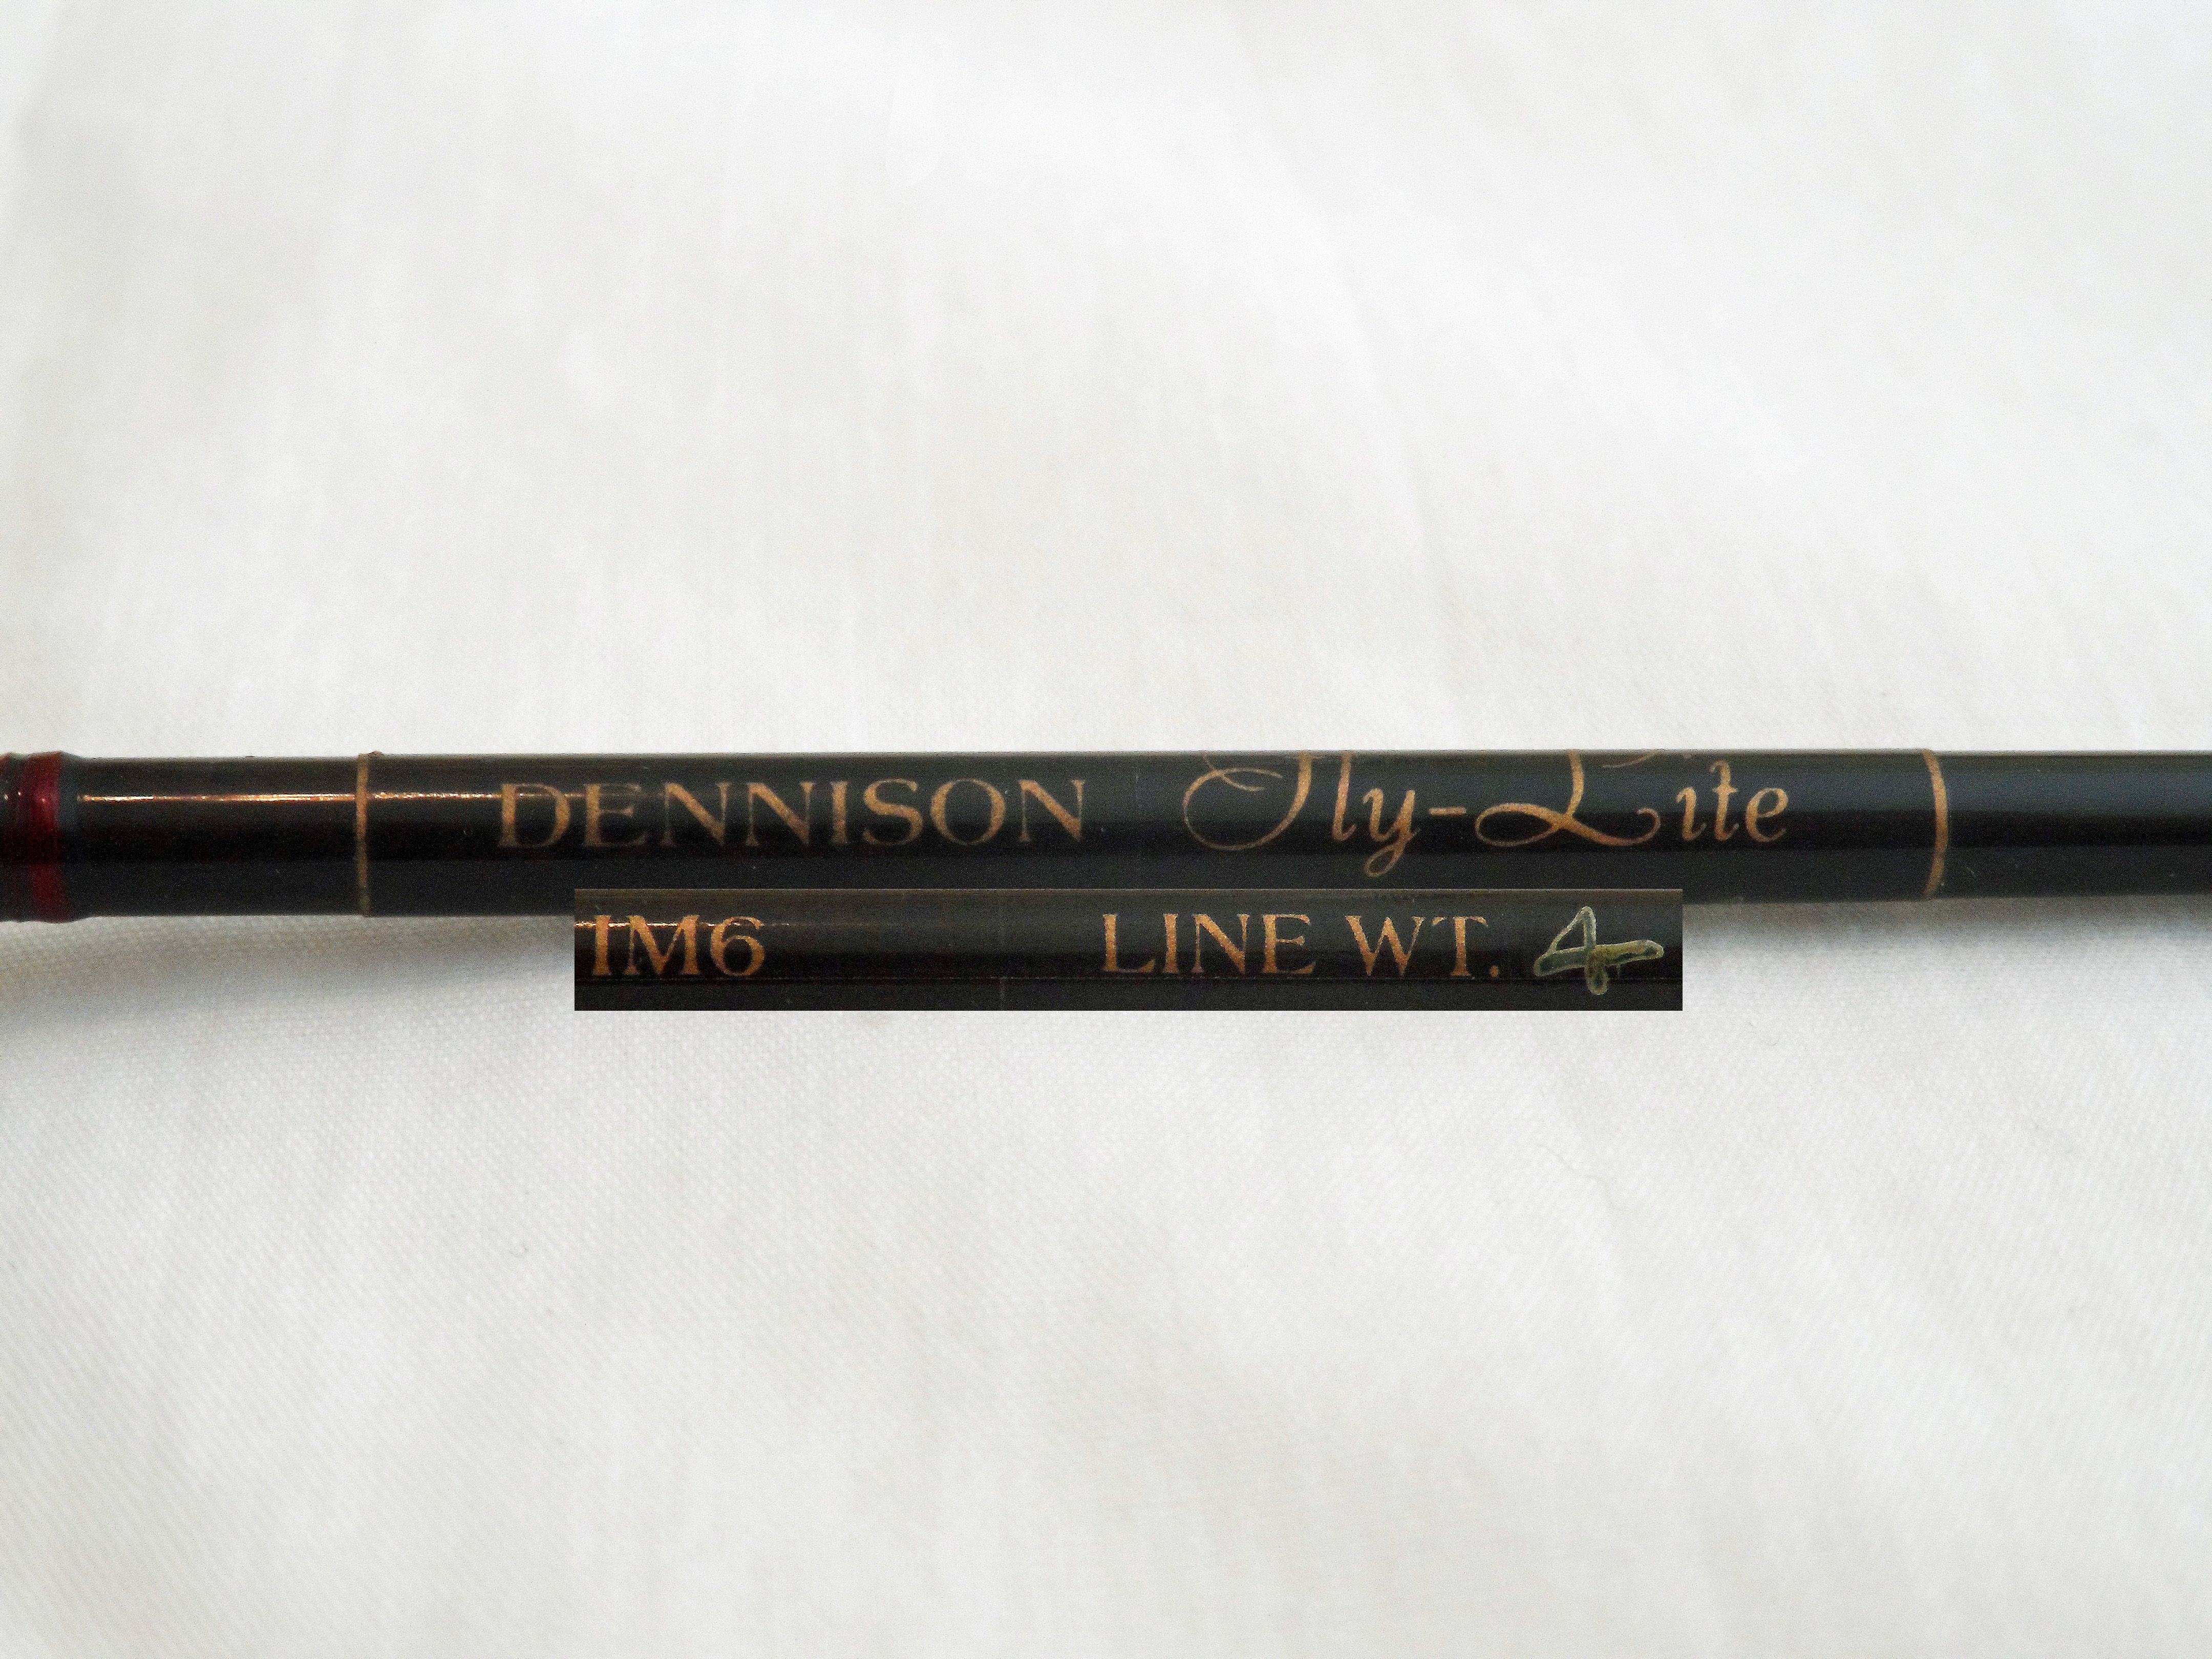 Dennison Fly Lite 4 Weight, 2 Piece, Ultra Light Fly Rod   FlyMasters